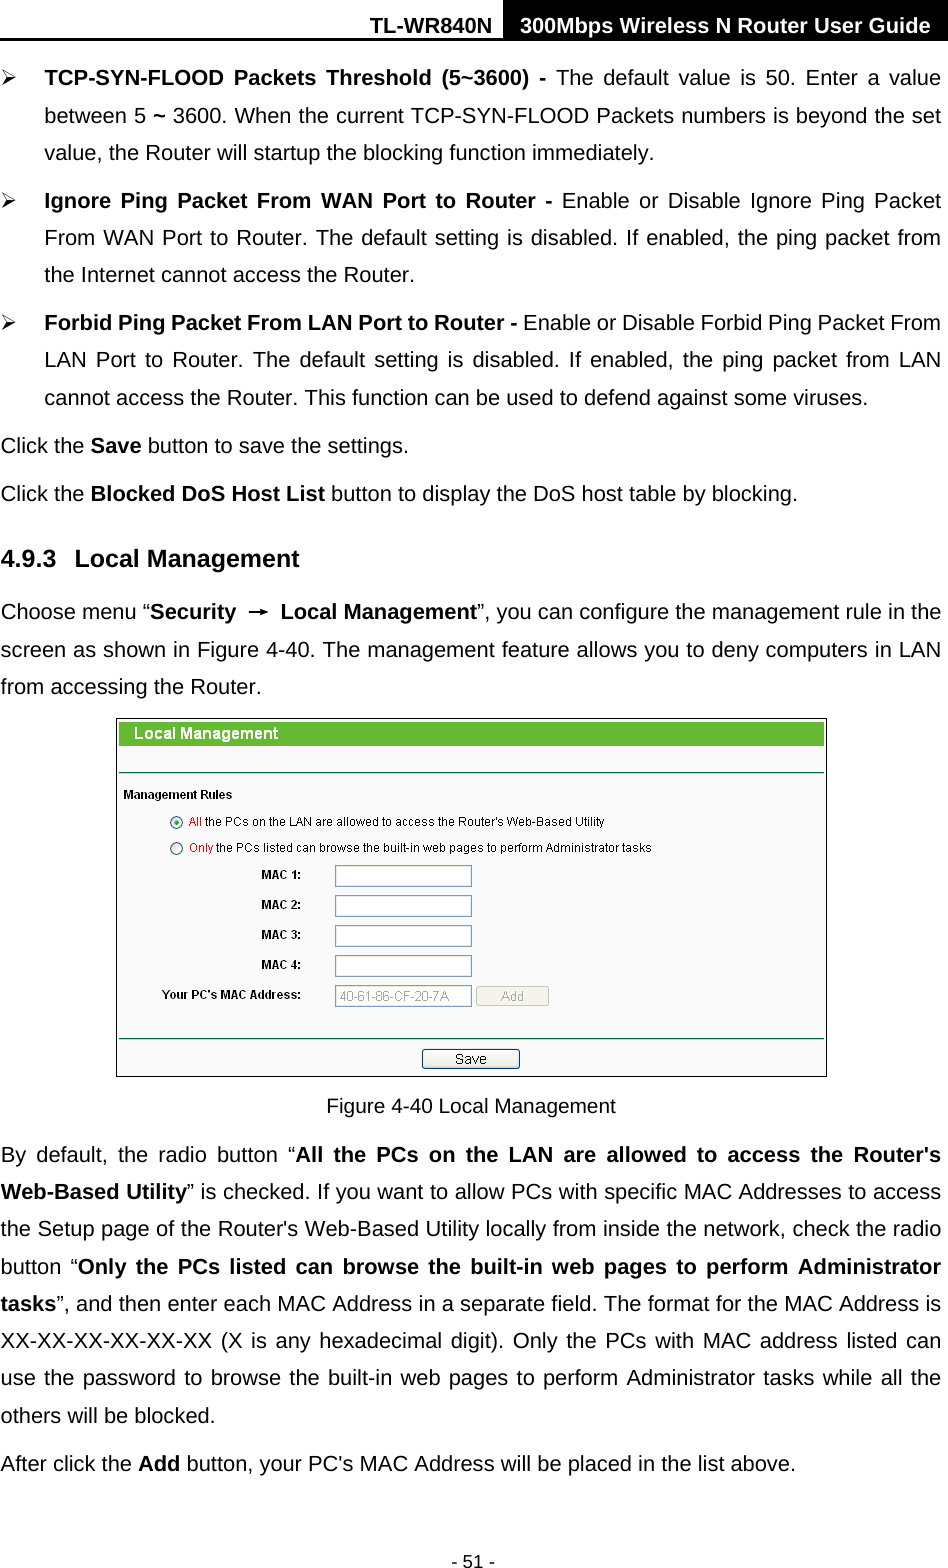 TL-WR840N 300Mbps Wireless N Router User Guide  - 51 -  TCP-SYN-FLOOD Packets Threshold (5~3600) - The default value is 50. Enter a value between 5 ~ 3600. When the current TCP-SYN-FLOOD Packets numbers is beyond the set value, the Router will startup the blocking function immediately.    Ignore Ping Packet From WAN Port to Router - Enable or Disable Ignore Ping Packet From WAN Port to Router. The default setting is disabled. If enabled, the ping packet from the Internet cannot access the Router.    Forbid Ping Packet From LAN Port to Router - Enable or Disable Forbid Ping Packet From LAN Port to Router. The default setting is disabled. If enabled, the ping packet from LAN cannot access the Router. This function can be used to defend against some viruses.   Click the Save button to save the settings. Click the Blocked DoS Host List button to display the DoS host table by blocking.   4.9.3 Local Management Choose menu “Security → Local Management”, you can configure the management rule in the screen as shown in Figure 4-40. The management feature allows you to deny computers in LAN from accessing the Router.  Figure 4-40 Local Management By default, the radio button “All the PCs on the LAN are allowed to access the Router&apos;s Web-Based Utility” is checked. If you want to allow PCs with specific MAC Addresses to access the Setup page of the Router&apos;s Web-Based Utility locally from inside the network, check the radio button “Only the PCs listed can browse the built-in web pages to perform Administrator tasks”, and then enter each MAC Address in a separate field. The format for the MAC Address is XX-XX-XX-XX-XX-XX (X is any hexadecimal digit). Only the PCs with MAC address listed can use the password to browse the built-in web pages to perform Administrator tasks while all the others will be blocked.   After click the Add button, your PC&apos;s MAC Address will be placed in the list above. 